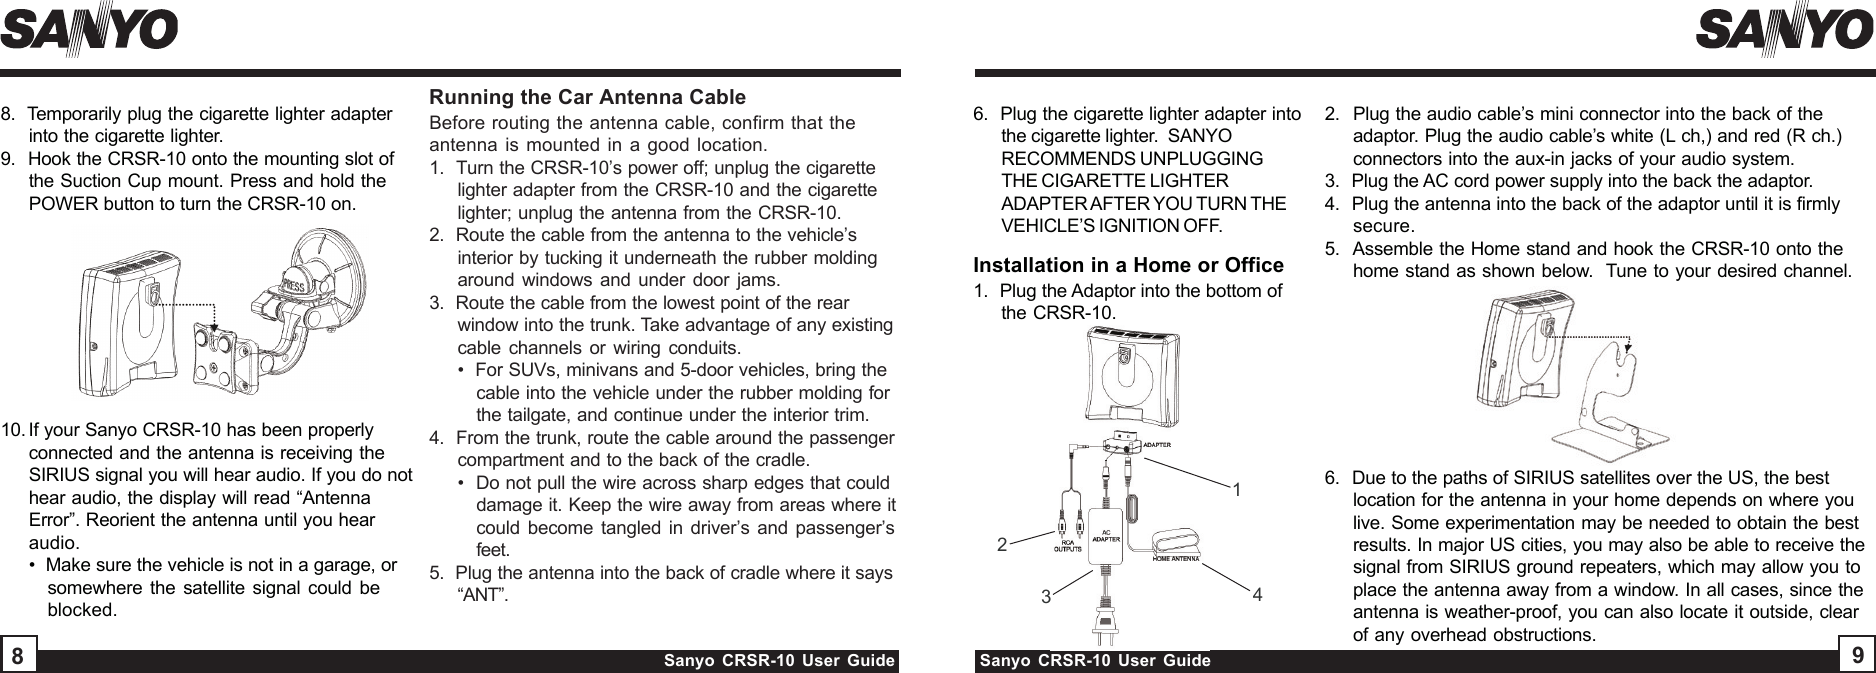 Sanyo CRSR-10 User Guide Sanyo CRSR-10 User Guide898.  Temporarily plug the cigarette lighter adapterinto the cigarette lighter.9.   Hook the CRSR-10 onto the mounting slot ofthe Suction Cup mount. Press and hold thePOWER button to turn the CRSR-10 on.Before routing the antenna cable, confirm that theantenna is mounted in a good location.1.  Turn the CRSR-10’s power off; unplug the cigarettelighter adapter from the CRSR-10 and the cigarettelighter; unplug the antenna from the CRSR-10.2.  Route the cable from the antenna to the vehicle’sinterior by tucking it underneath the rubber moldingaround windows and under door jams.3.  Route the cable from the lowest point of the rearwindow into the trunk. Take advantage of any existingcable channels or wiring conduits.•  For SUVs, minivans and 5-door vehicles, bring thecable into the vehicle under the rubber molding forthe tailgate, and continue under the interior trim.4.  From the trunk, route the cable around the passengercompartment and to the back of the cradle.•  Do not pull the wire across sharp edges that coulddamage it. Keep the wire away from areas where itcould become tangled in driver’s and passenger’sfeet.5.  Plug the antenna into the back of cradle where it says“ANT”.Installation in a Home or OfficeRunning the Car Antenna Cable23412.  Plug the audio cable’s mini connector into the back of theadaptor. Plug the audio cable’s white (L ch,) and red (R ch.)connectors into the aux-in jacks of your audio system.3.  Plug the AC cord power supply into the back the adaptor.4.  Plug the antenna into the back of the adaptor until it is firmlysecure.5.  Assemble the Home stand and hook the CRSR-10 onto thehome stand as shown below.  Tune to your desired channel.6.  Plug the cigarette lighter adapter intothe cigarette lighter.  SANYORECOMMENDS UNPLUGGINGTHE CIGARETTE LIGHTERADAPTER AFTER YOU TURN THEVEHICLE’S IGNITION OFF.6.  Due to the paths of SIRIUS satellites over the US, the bestlocation for the antenna in your home depends on where youlive. Some experimentation may be needed to obtain the bestresults. In major US cities, you may also be able to receive thesignal from SIRIUS ground repeaters, which may allow you toplace the antenna away from a window. In all cases, since theantenna is weather-proof, you can also locate it outside, clearof any overhead obstructions.1.  Plug the Adaptor into the bottom ofthe CRSR-10.10. If your Sanyo CRSR-10 has been properlyconnected and the antenna is receiving theSIRIUS signal you will hear audio. If you do nothear audio, the display will read “AntennaError”. Reorient the antenna until you hearaudio.•  Make sure the vehicle is not in a garage, orsomewhere the satellite signal could beblocked.